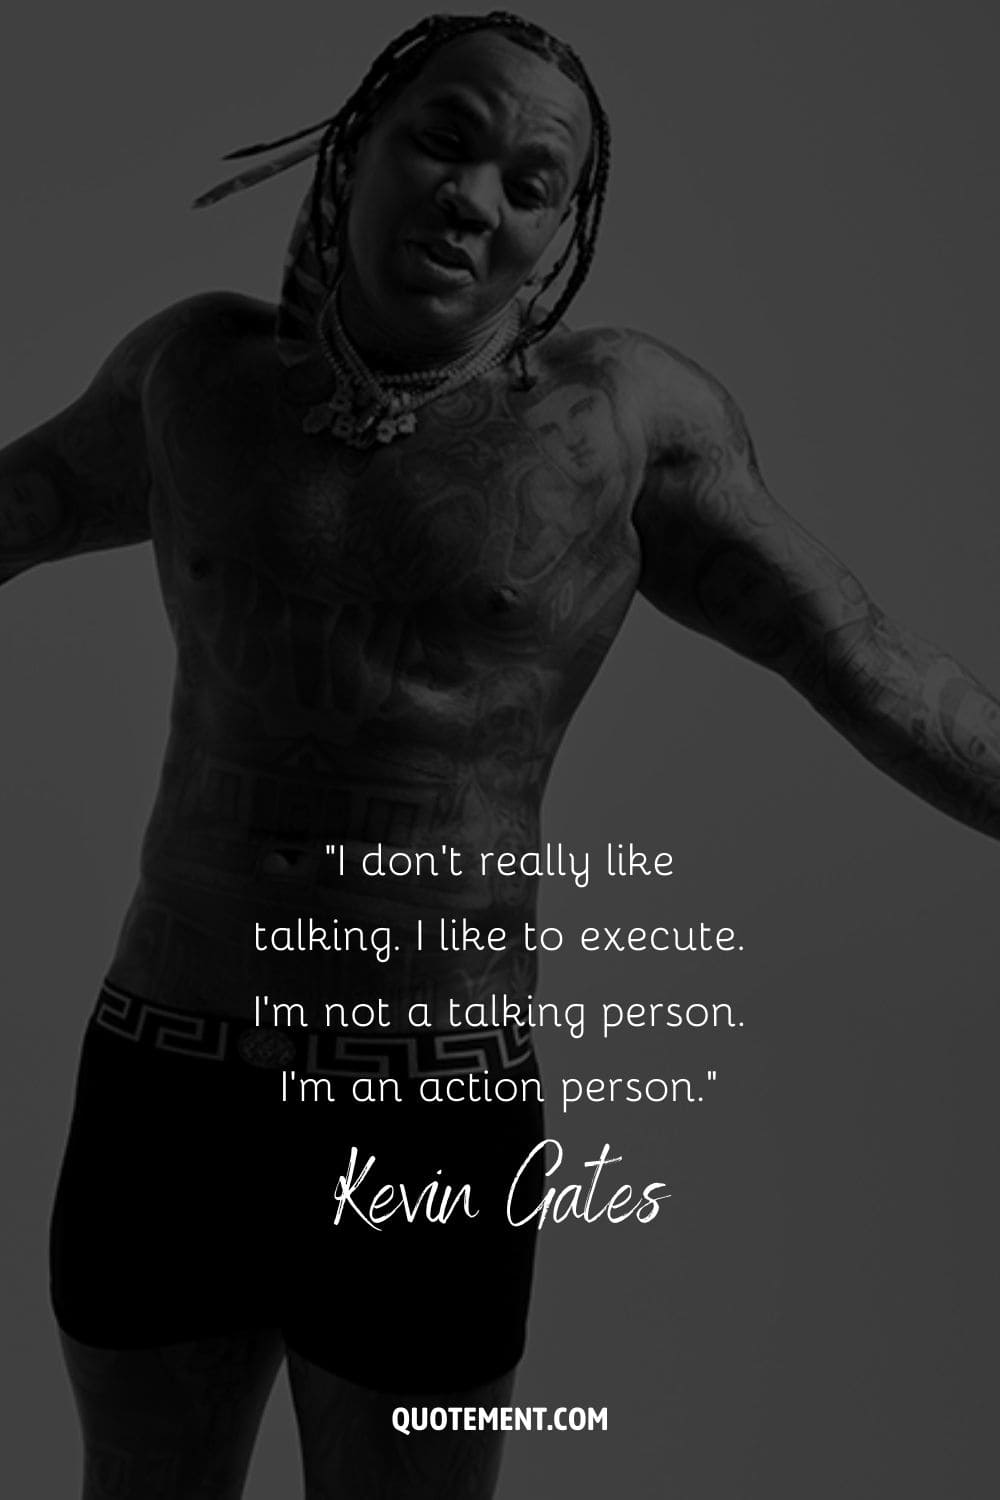 “I don’t really like talking. I like to execute. I’m not a talking person. I’m an action person.” – Kevin Gates